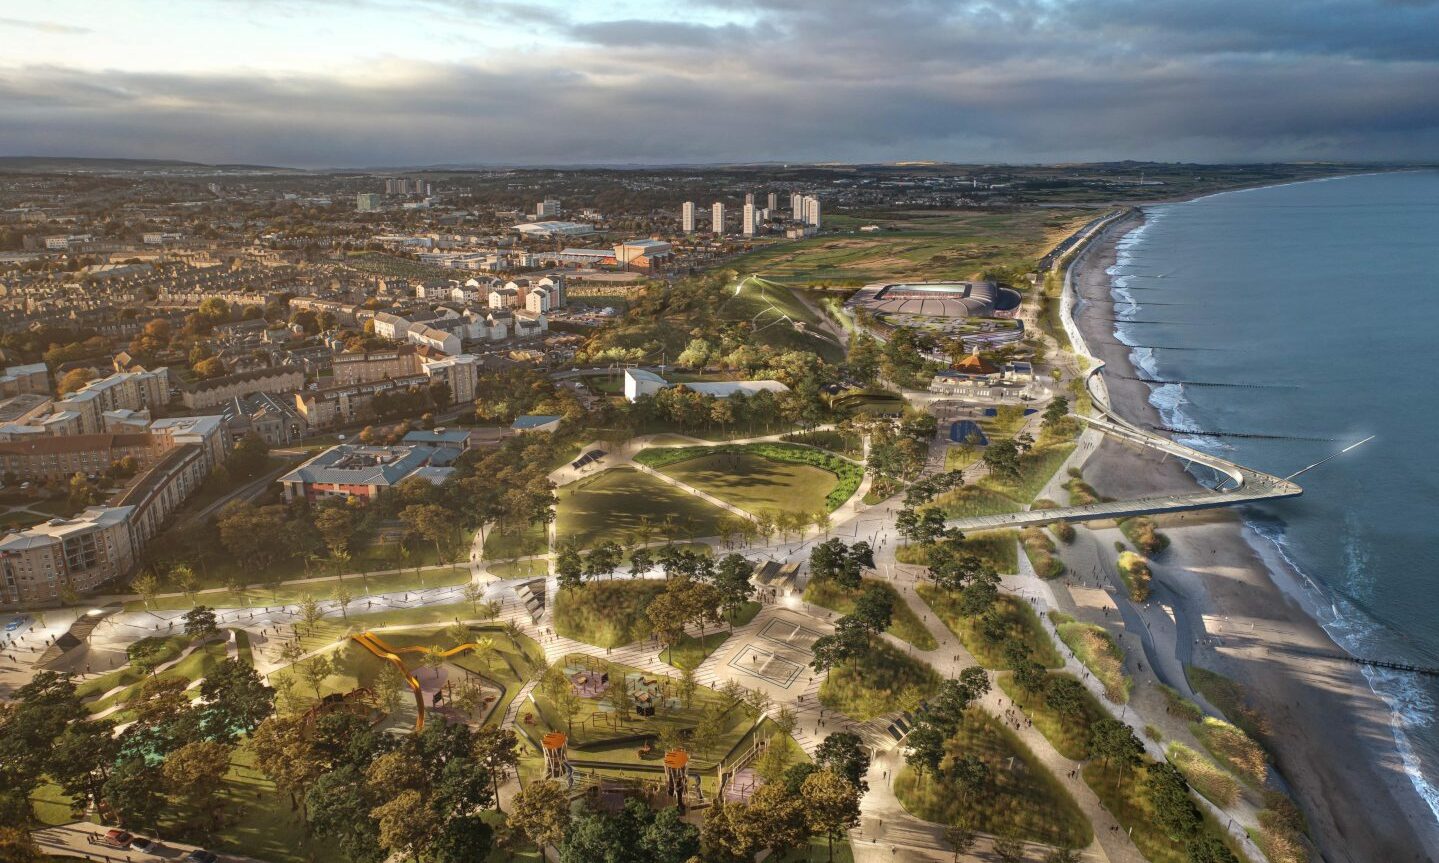 The new stadium is poised to spark the regeneration of the beach